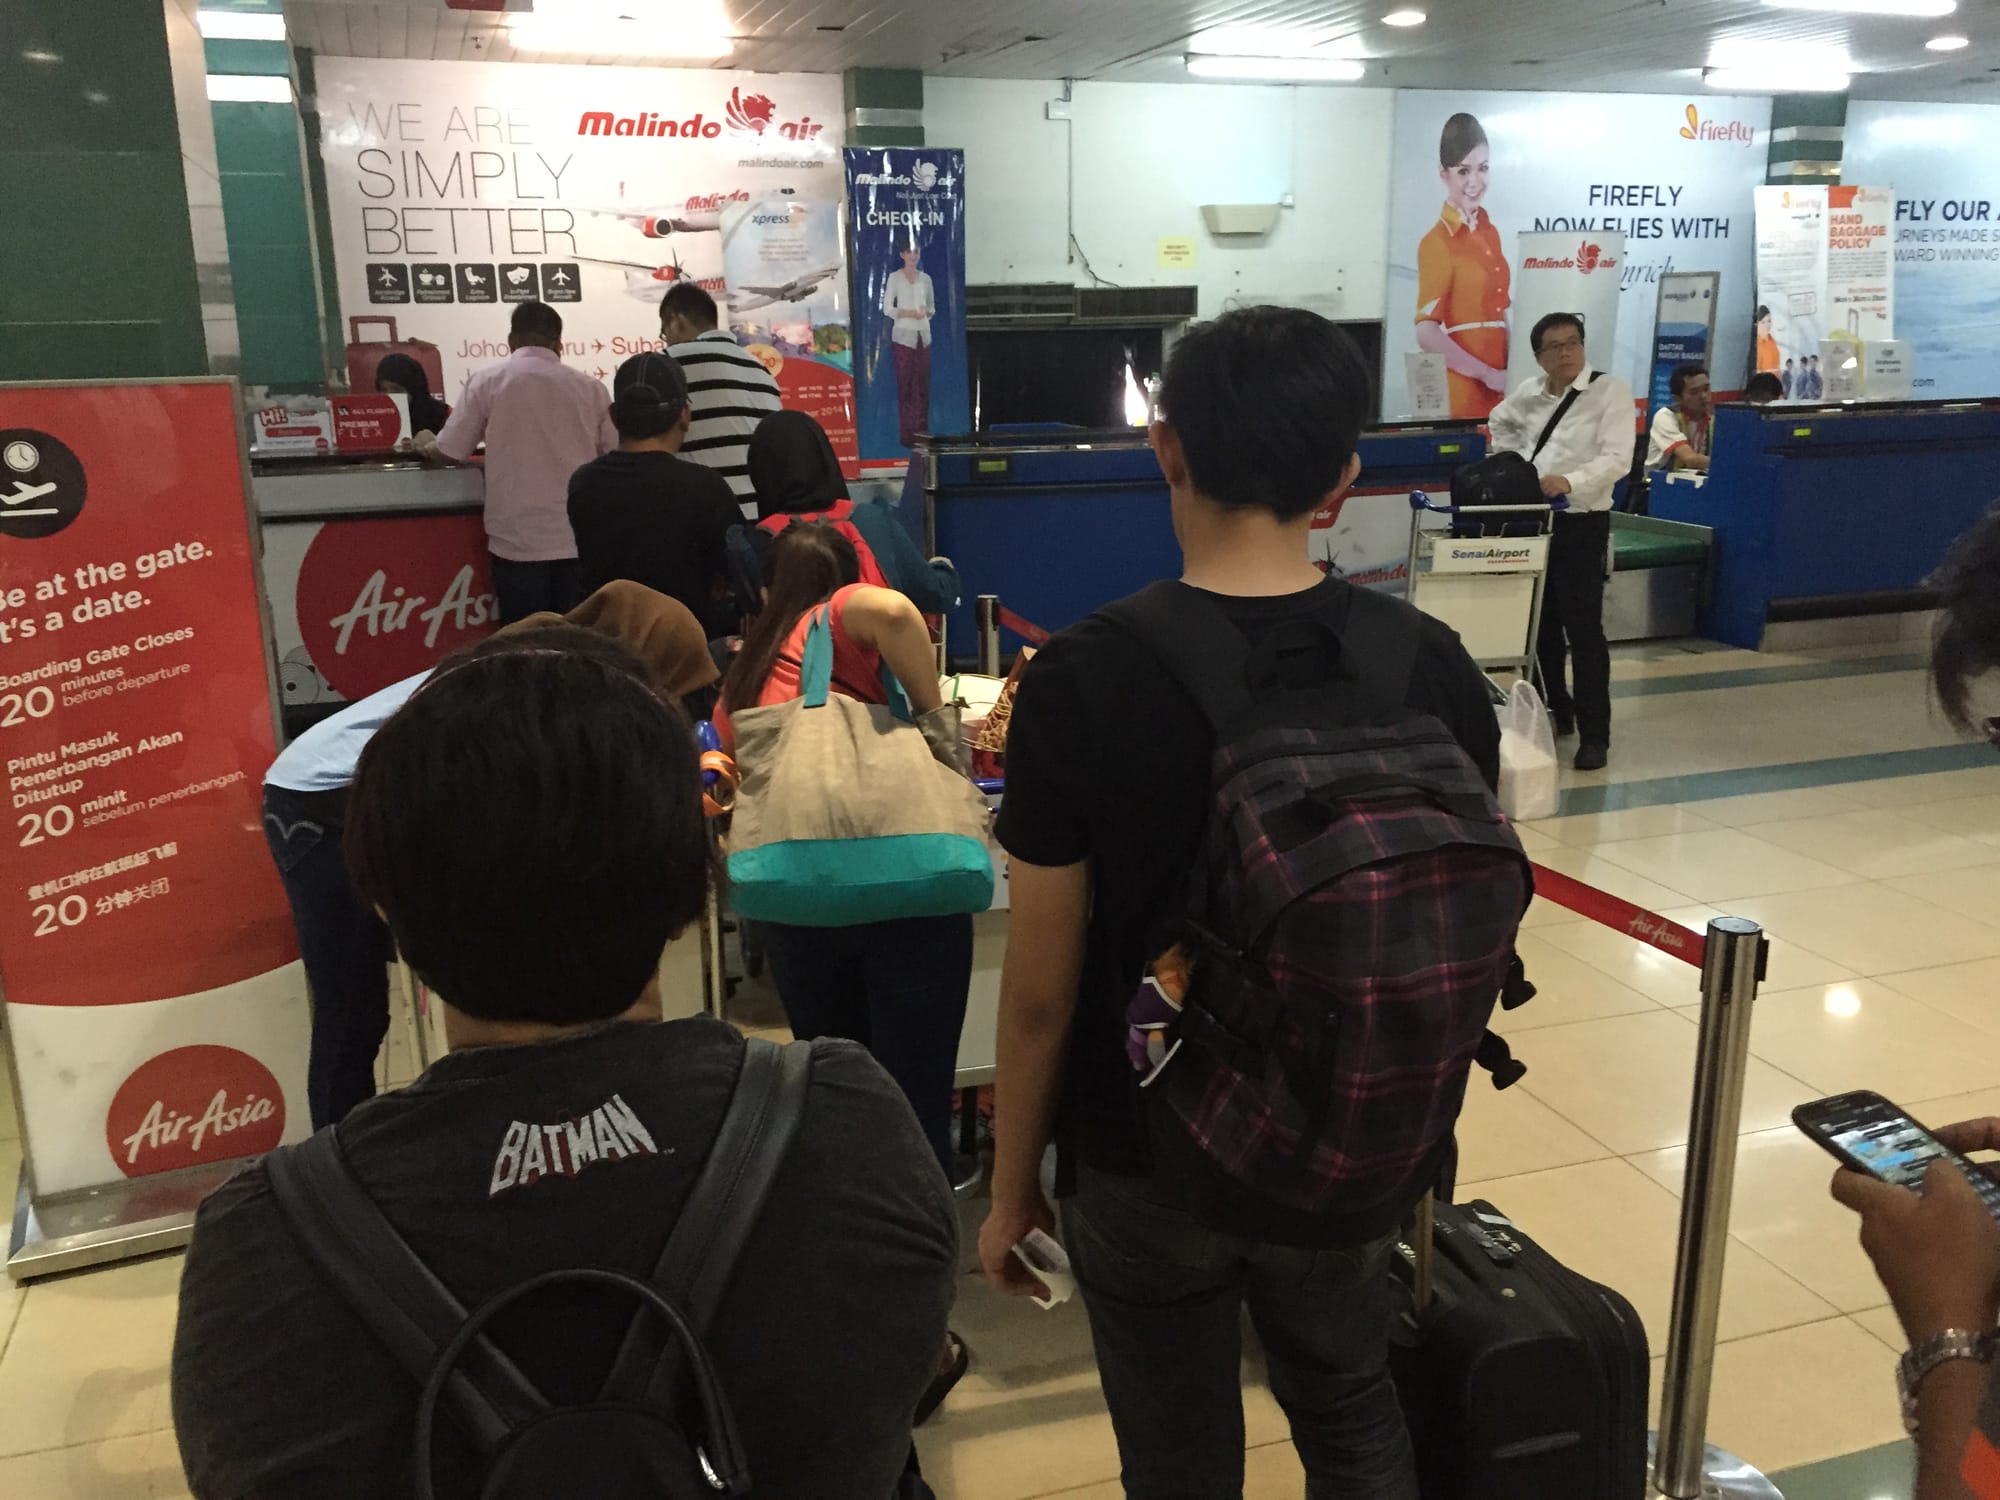 Photo by Author — madness at check-in — thanks, Air Asia